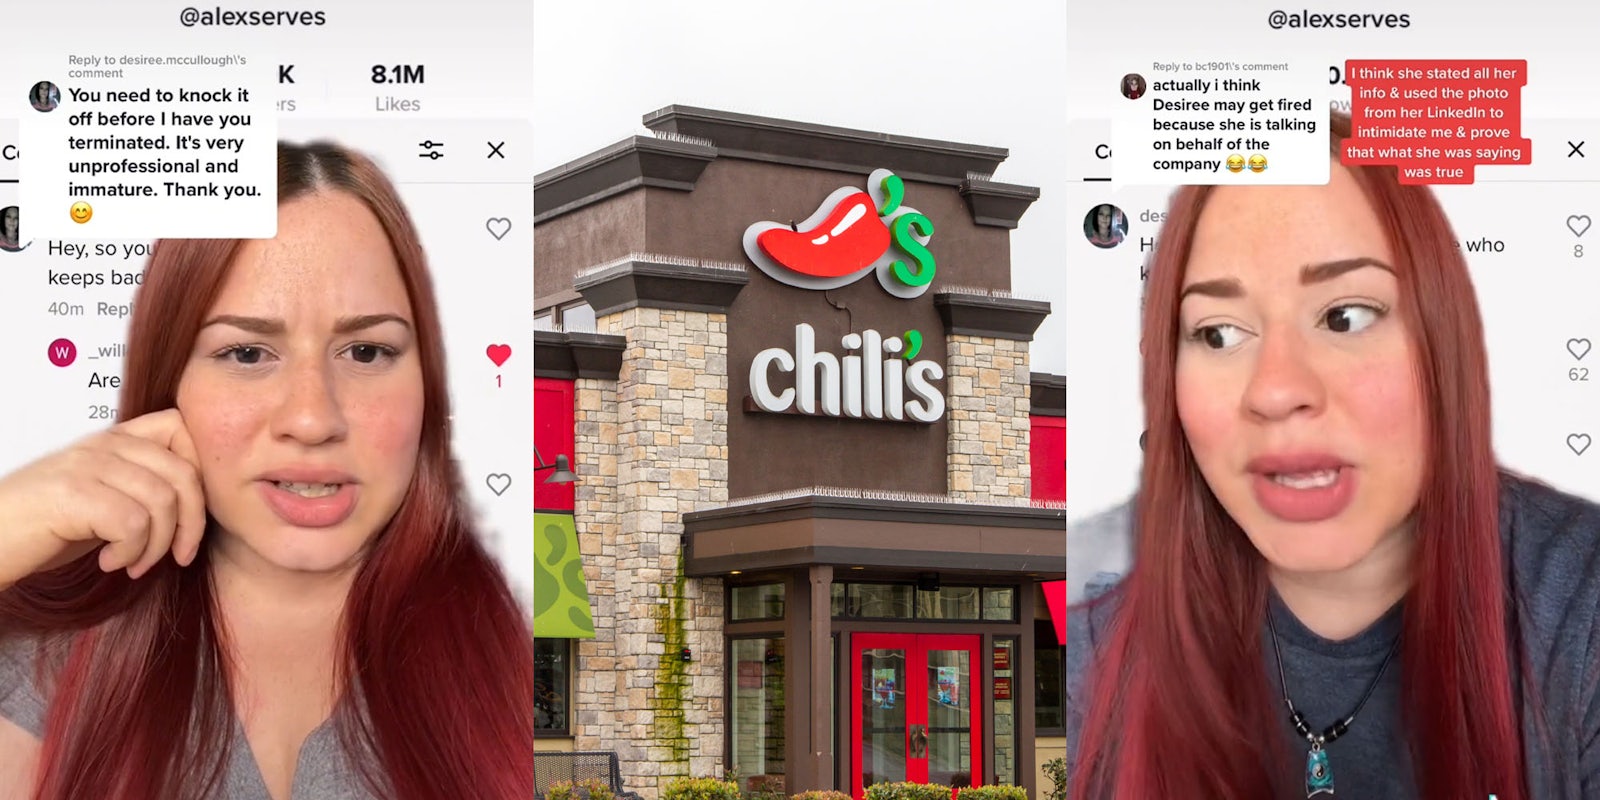 Woman greebscreen tiktok caption 'You need to knock it off before I have you terminated. It's very unprofessional and immature. Thank you.' (l) Chili's restaurant (c) Woman greenscreen video caption 'I think she stated all her info and useded the photo from her linkedin to intimidate me and prove that what she was saying was true' 'actually i think she might get fired because she is talking on behalf of the company' (r)